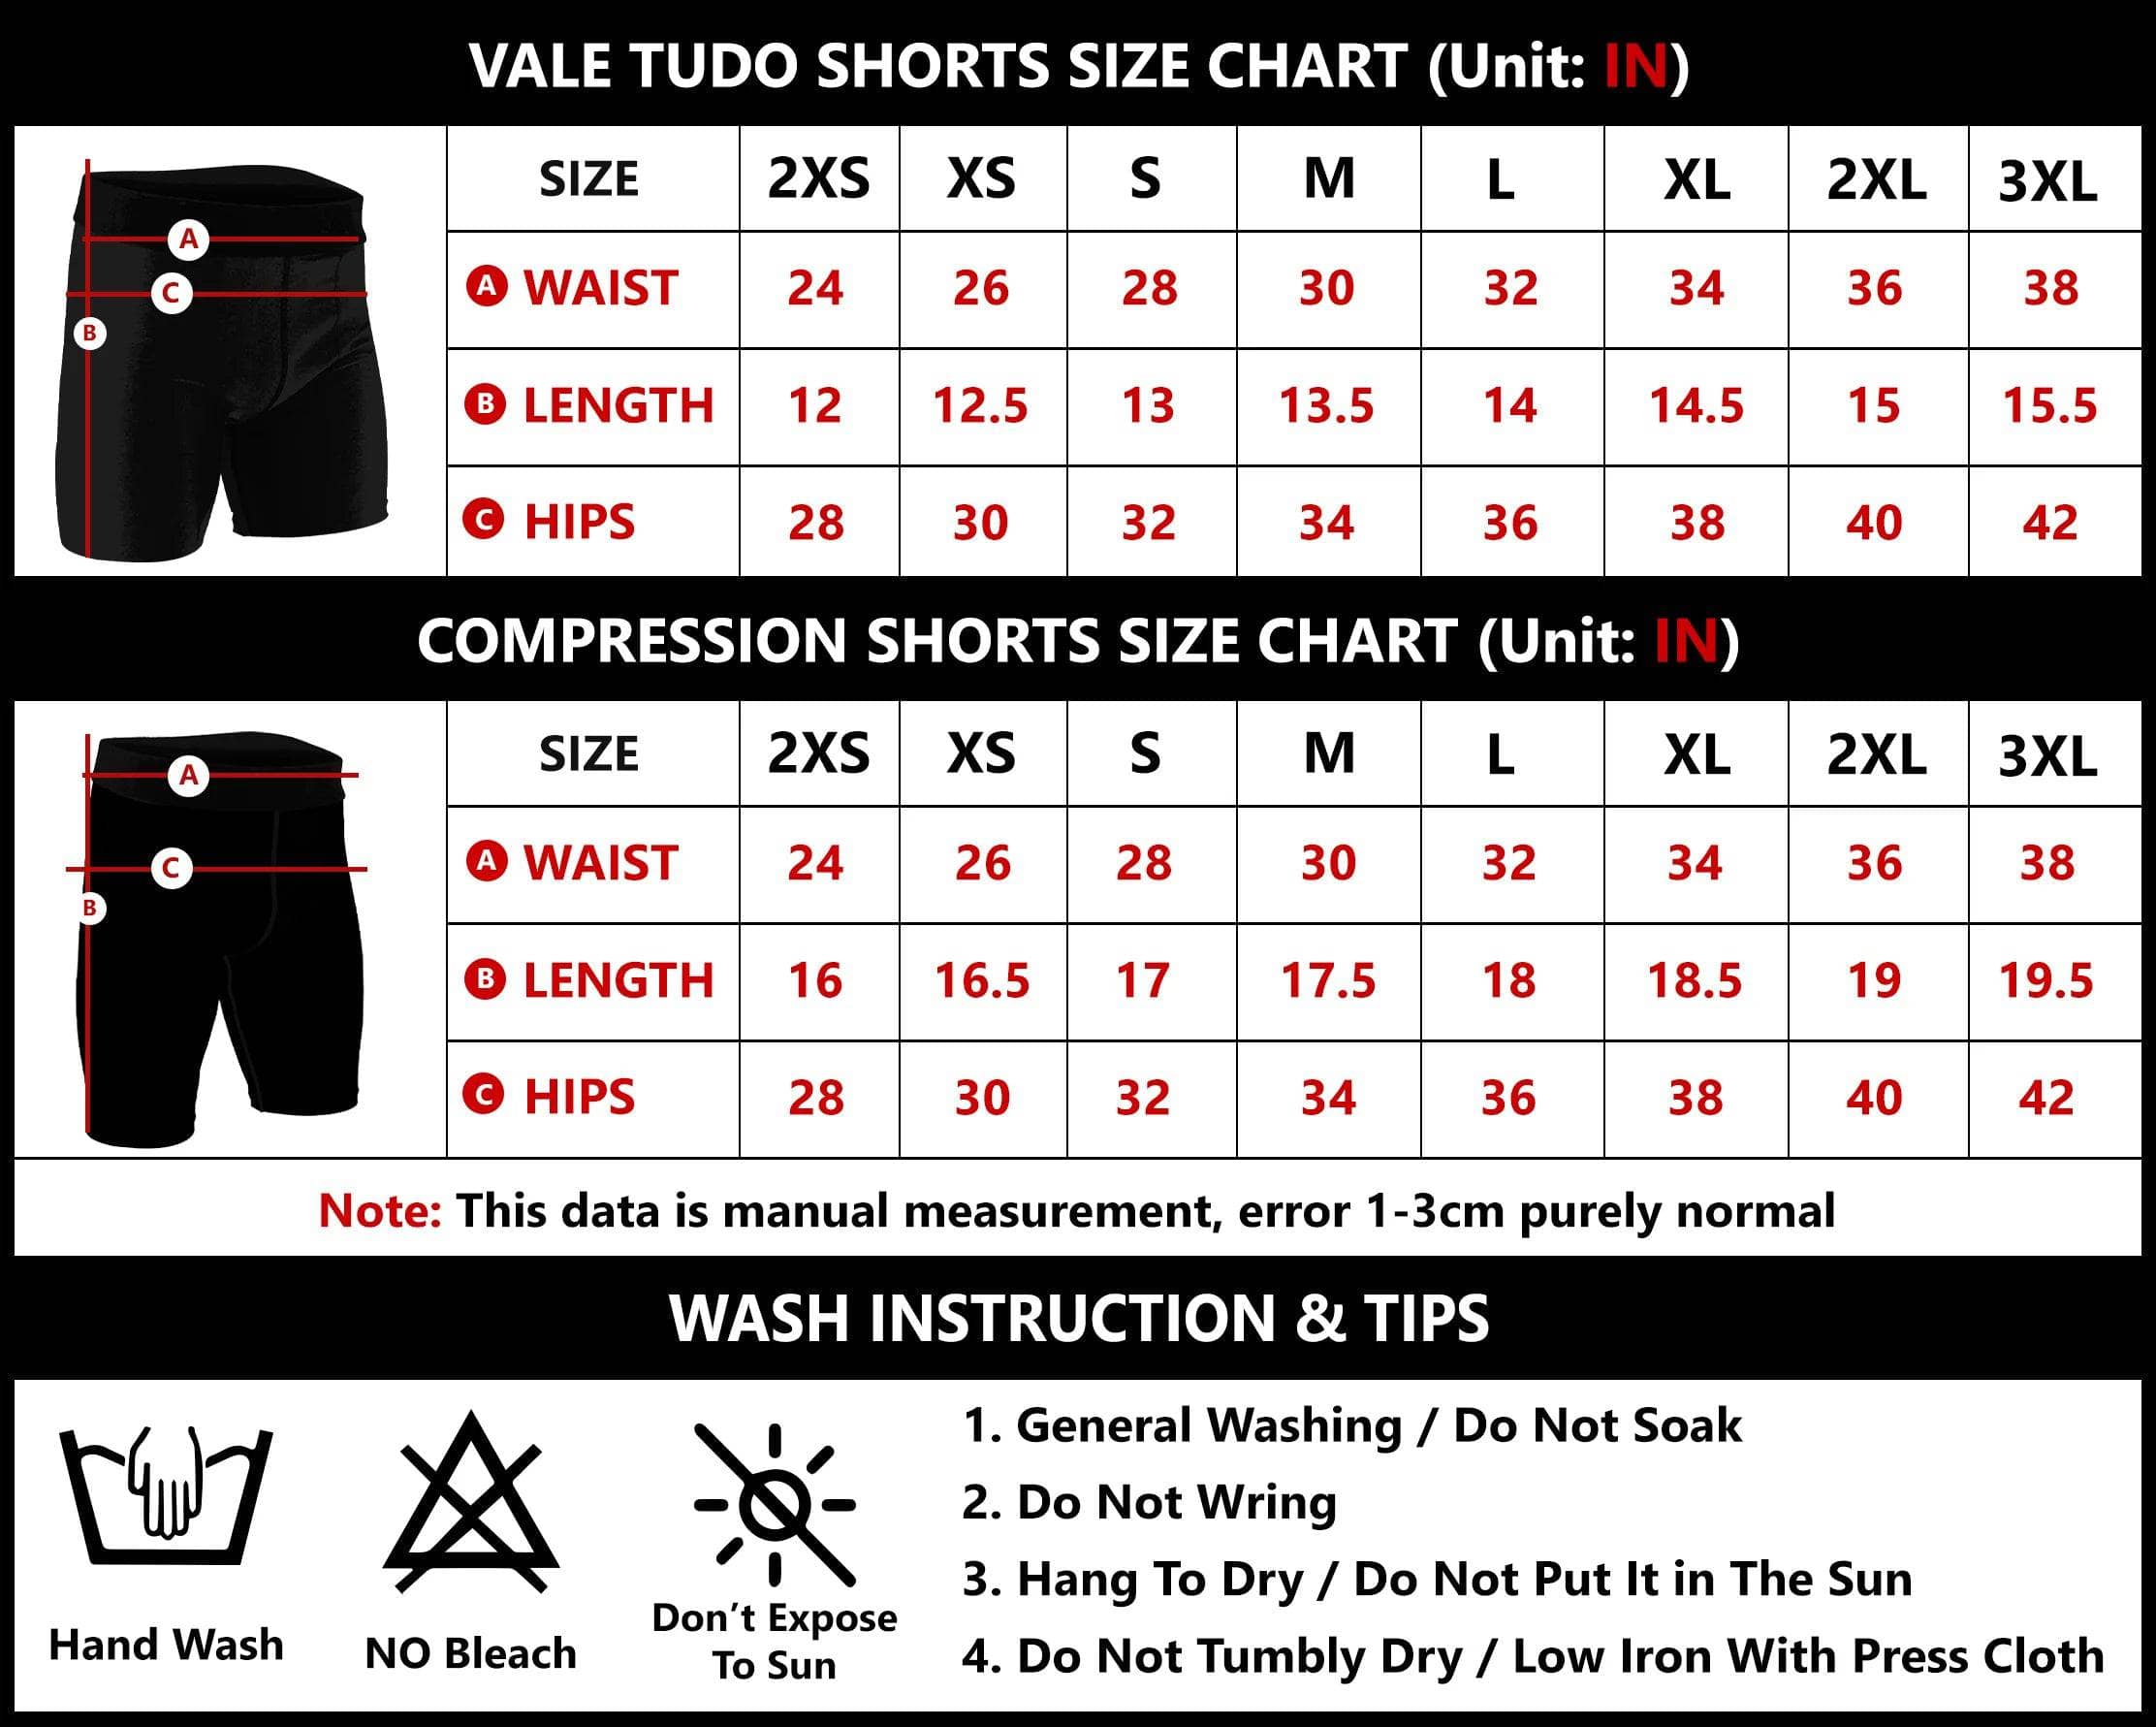 Heart of Thorns BJJ/MMA Compression Shorts XMARTIAL